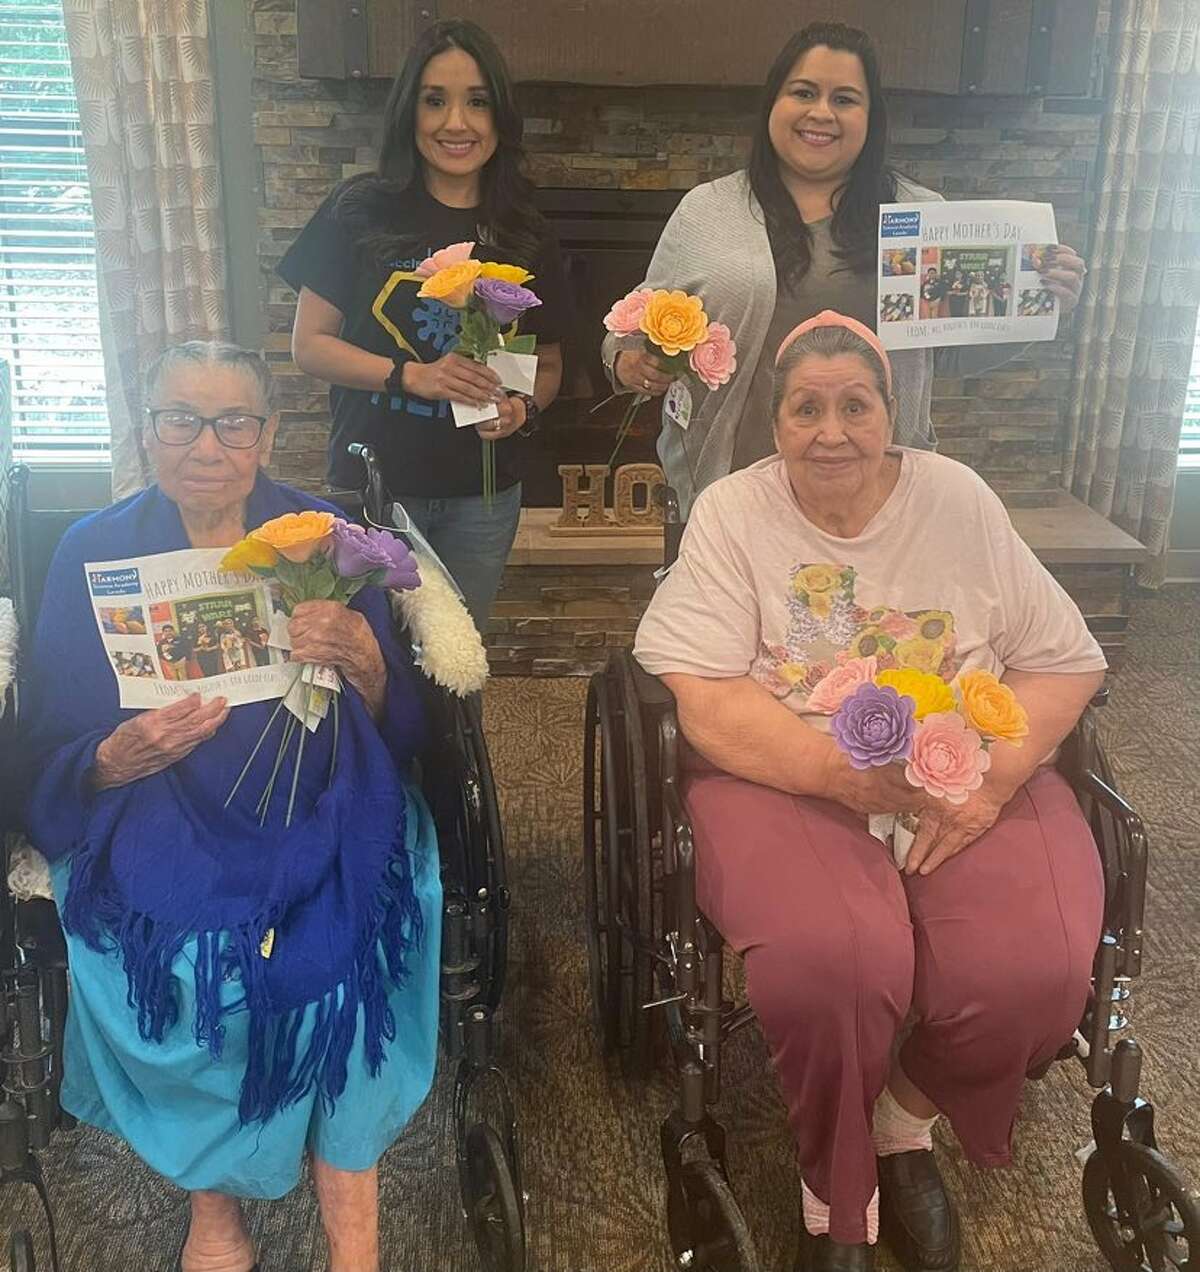 A group of sixth grade students from Harmony Science Academy crafted 3-D printed flowers as a gift for the mothers living at Las Alturas Nursing and Transitional Care to celebrate Mother's Day last week.